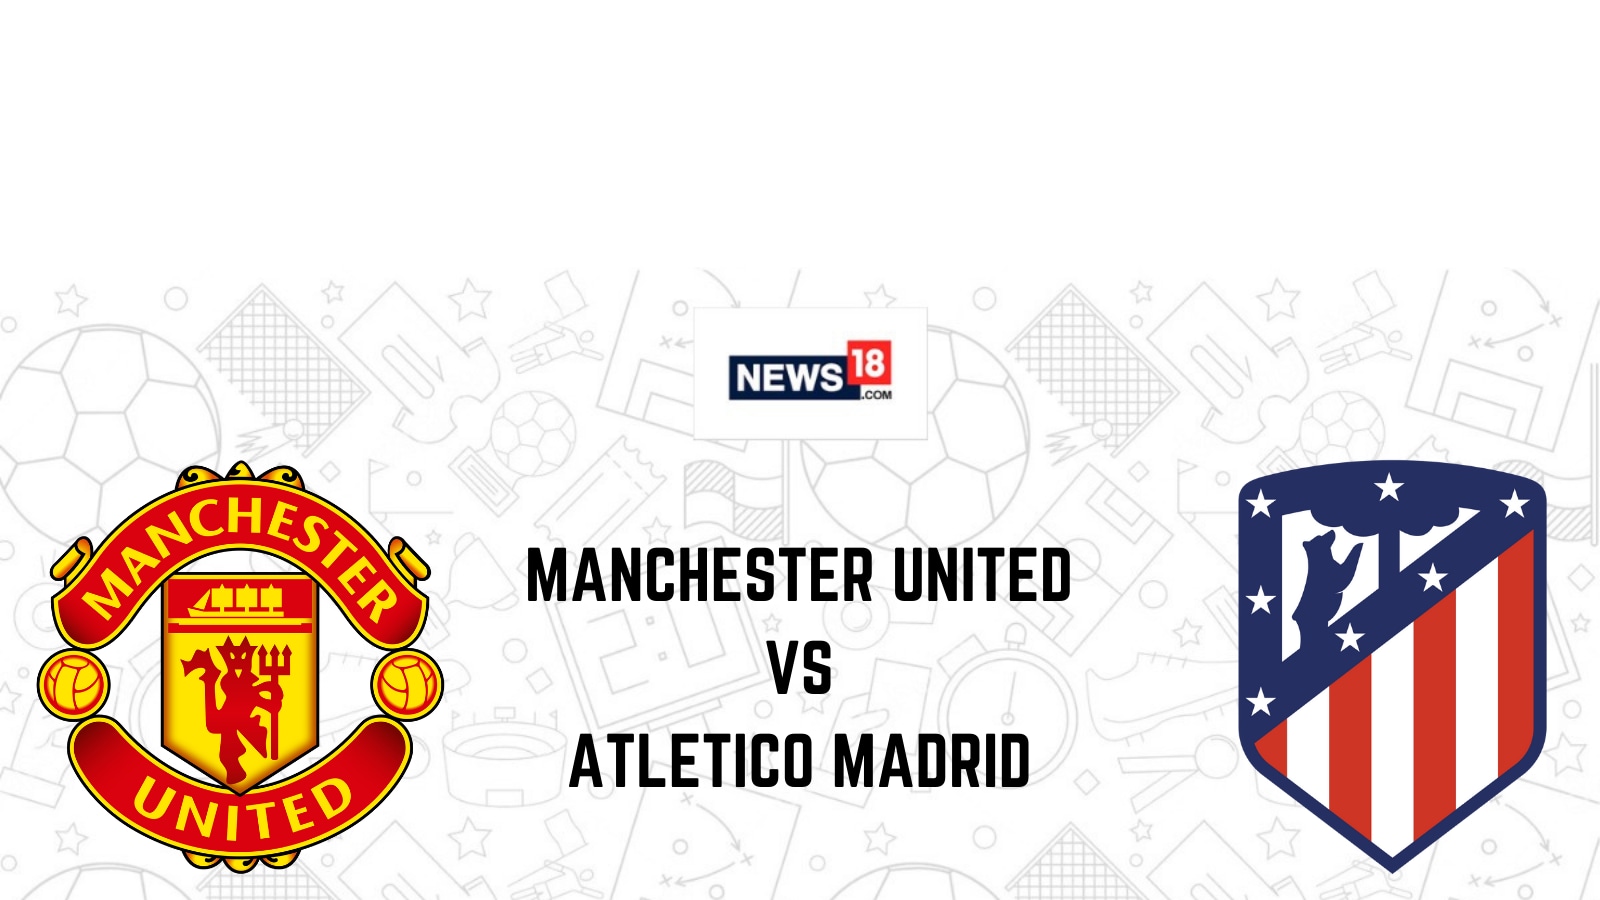 UEFA Champions League 2021-22 Manchester United vs Atletico Madrid LIVE Streaming When and Where to Watch Online, TV Telecast, Team News